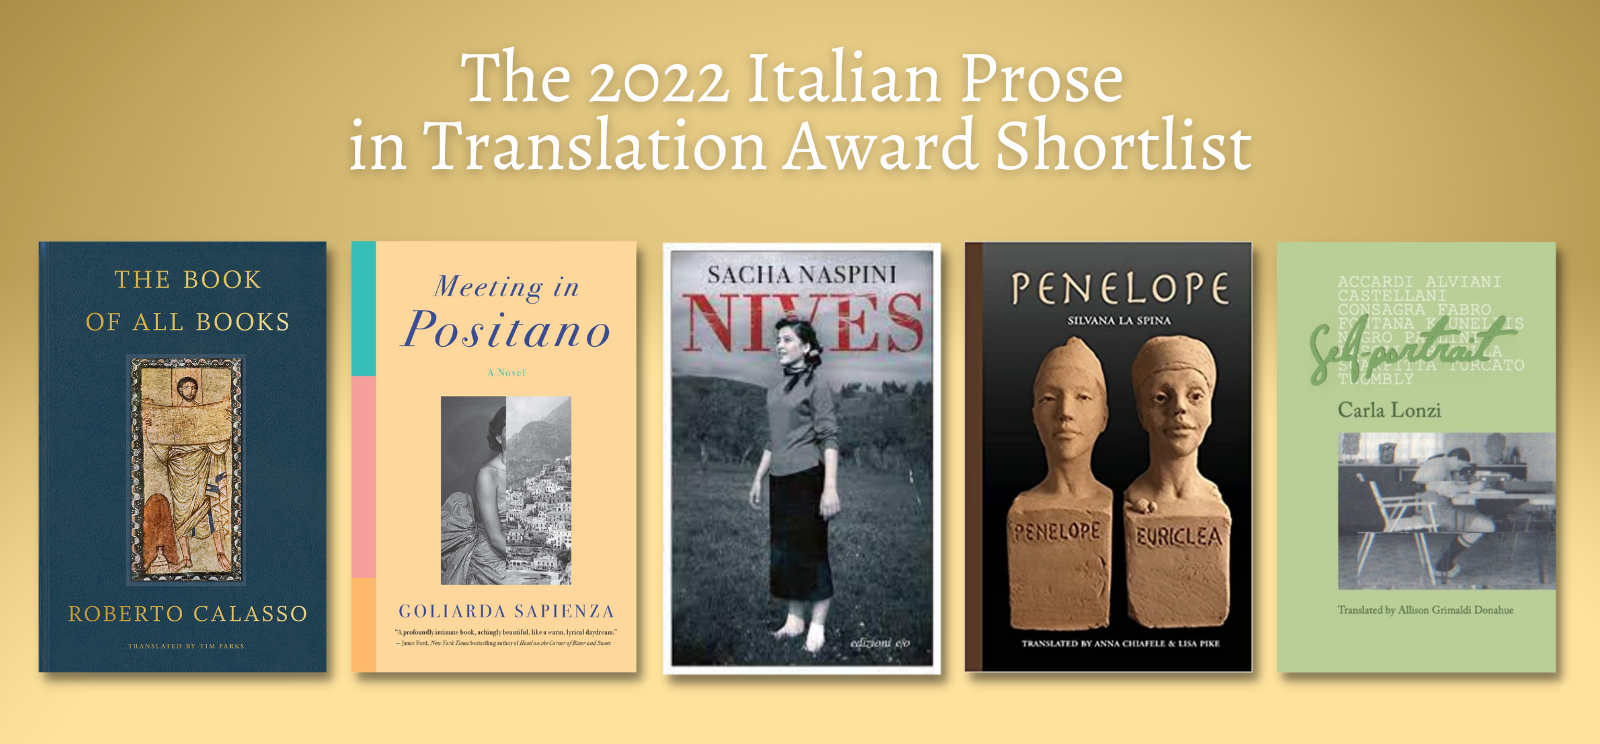 A composite image of the covers of the books selected for the 2022 Italian Prose in Translation Award shortlist, over a gold background with the heading, "The 2022 Italian Prose in Translation Award Shortlist"